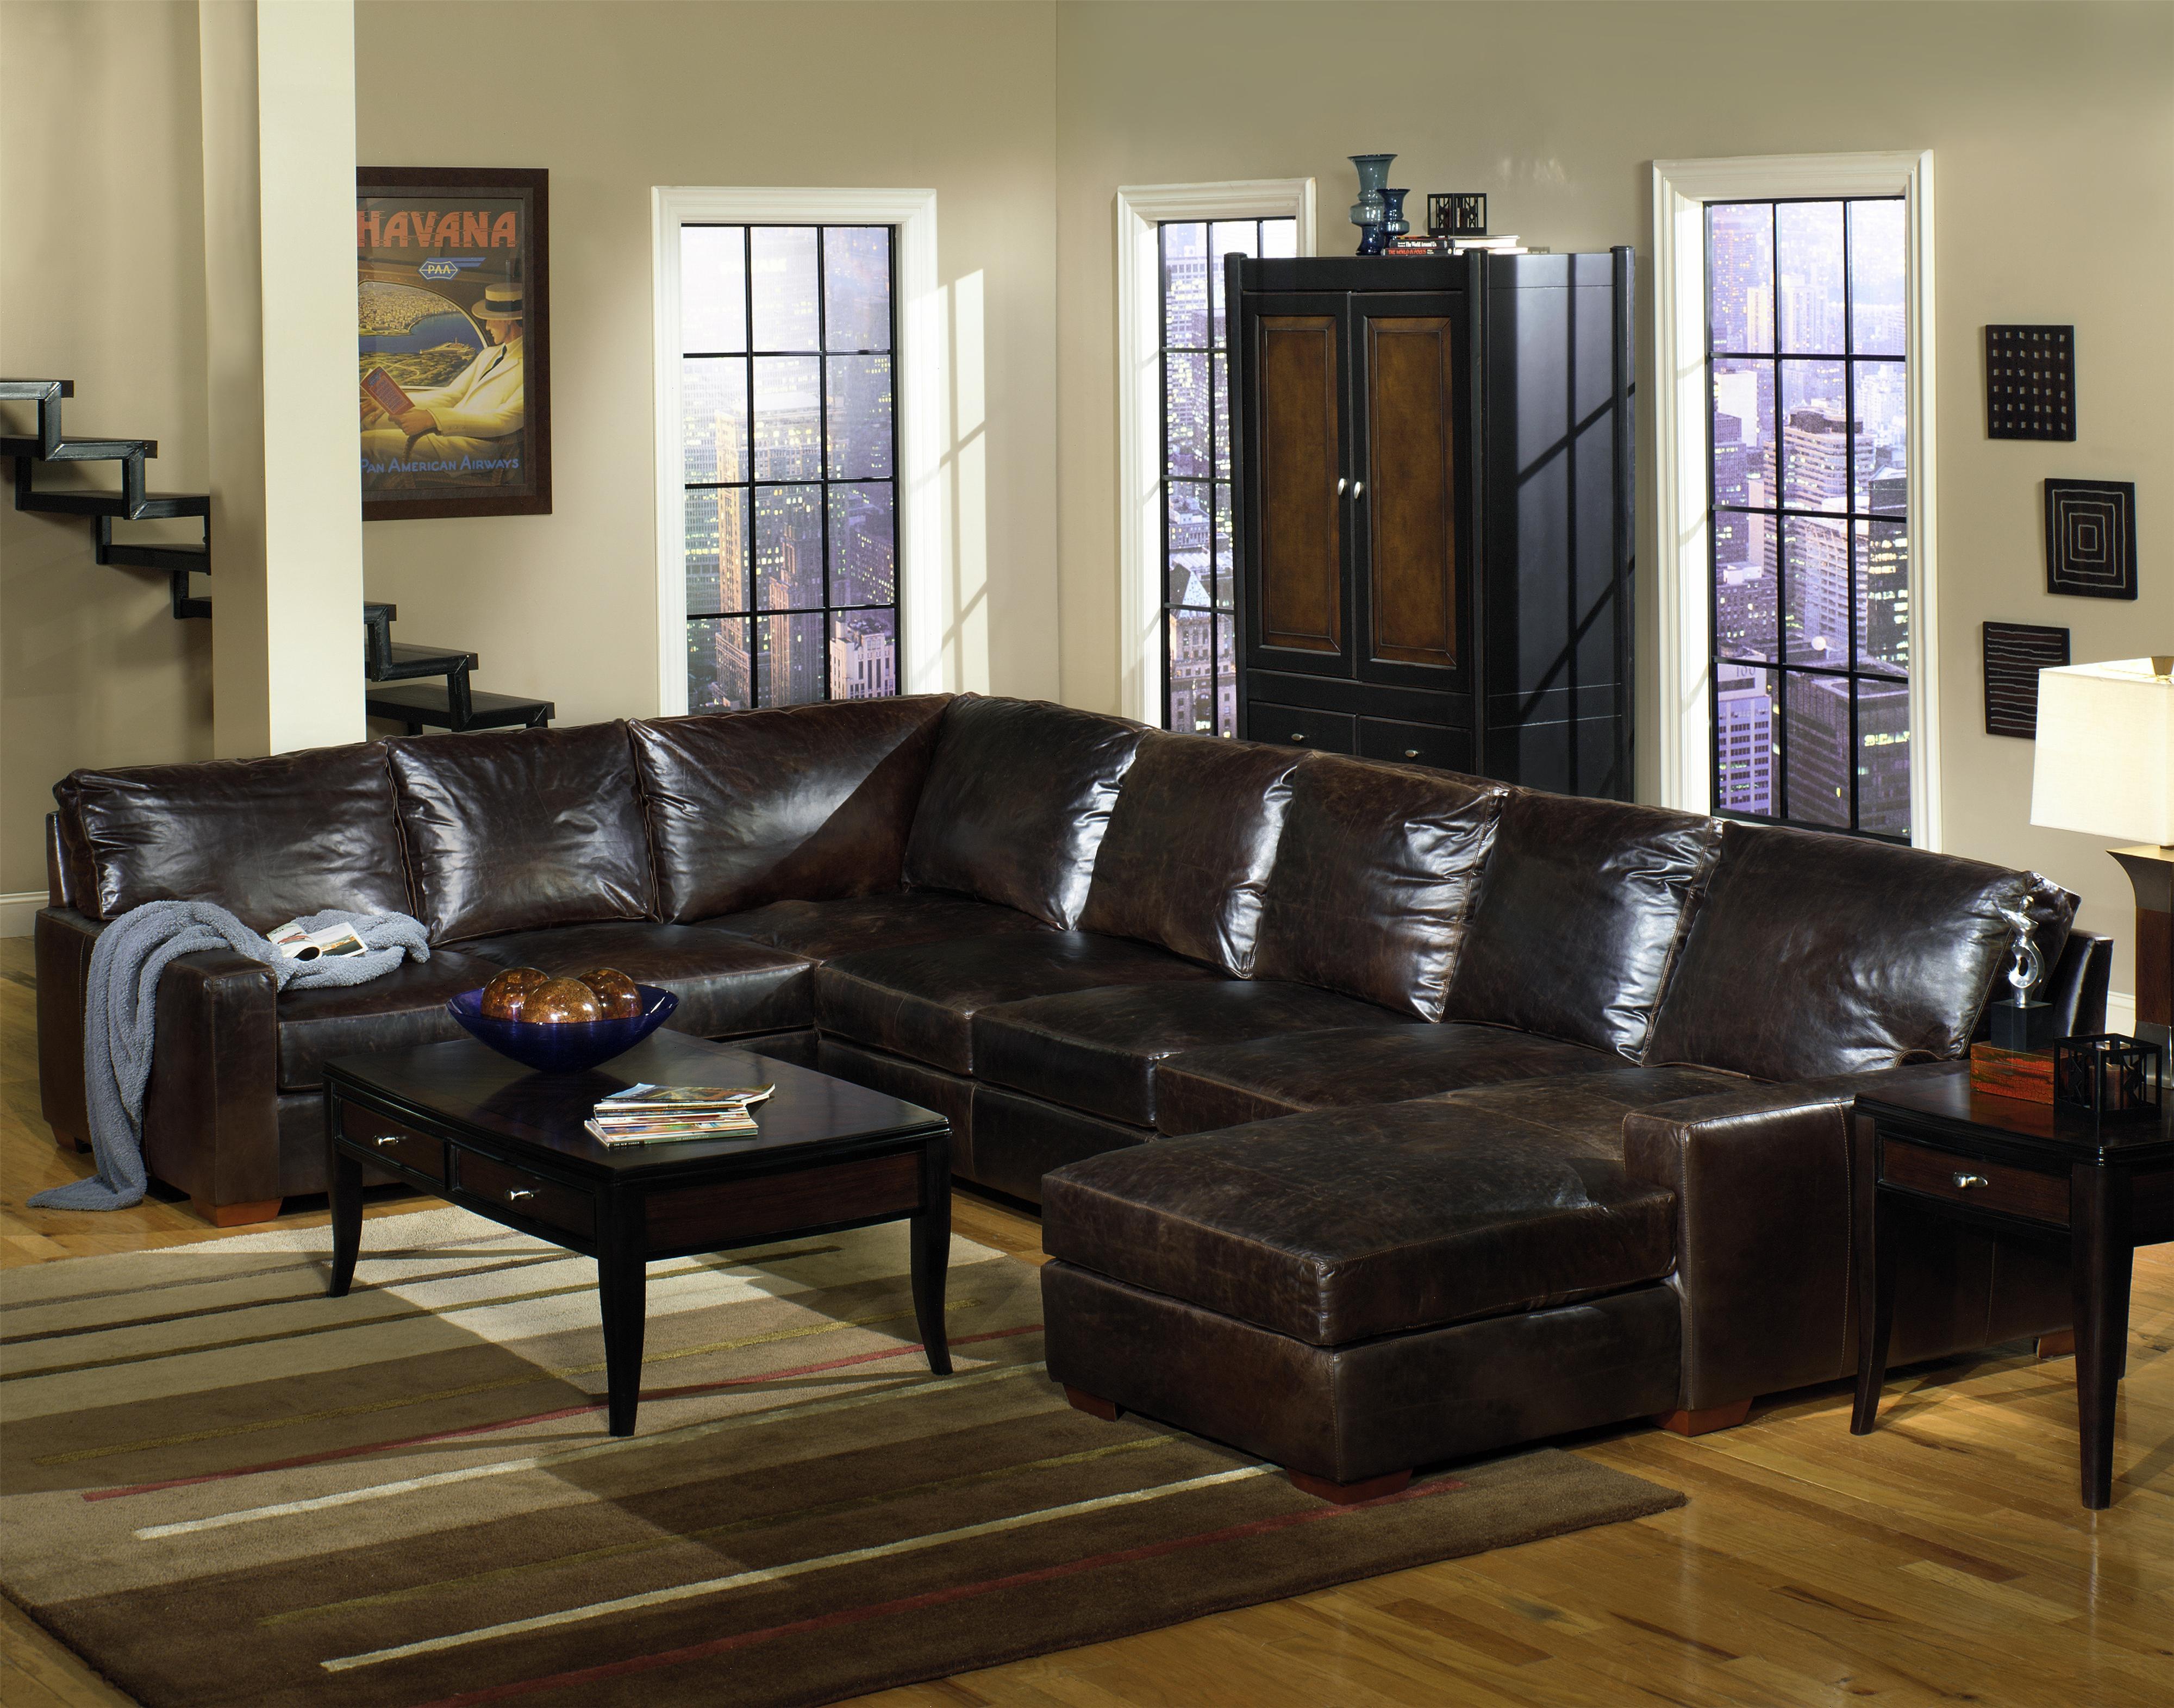 Distressed Leather Sectional HomesFeed